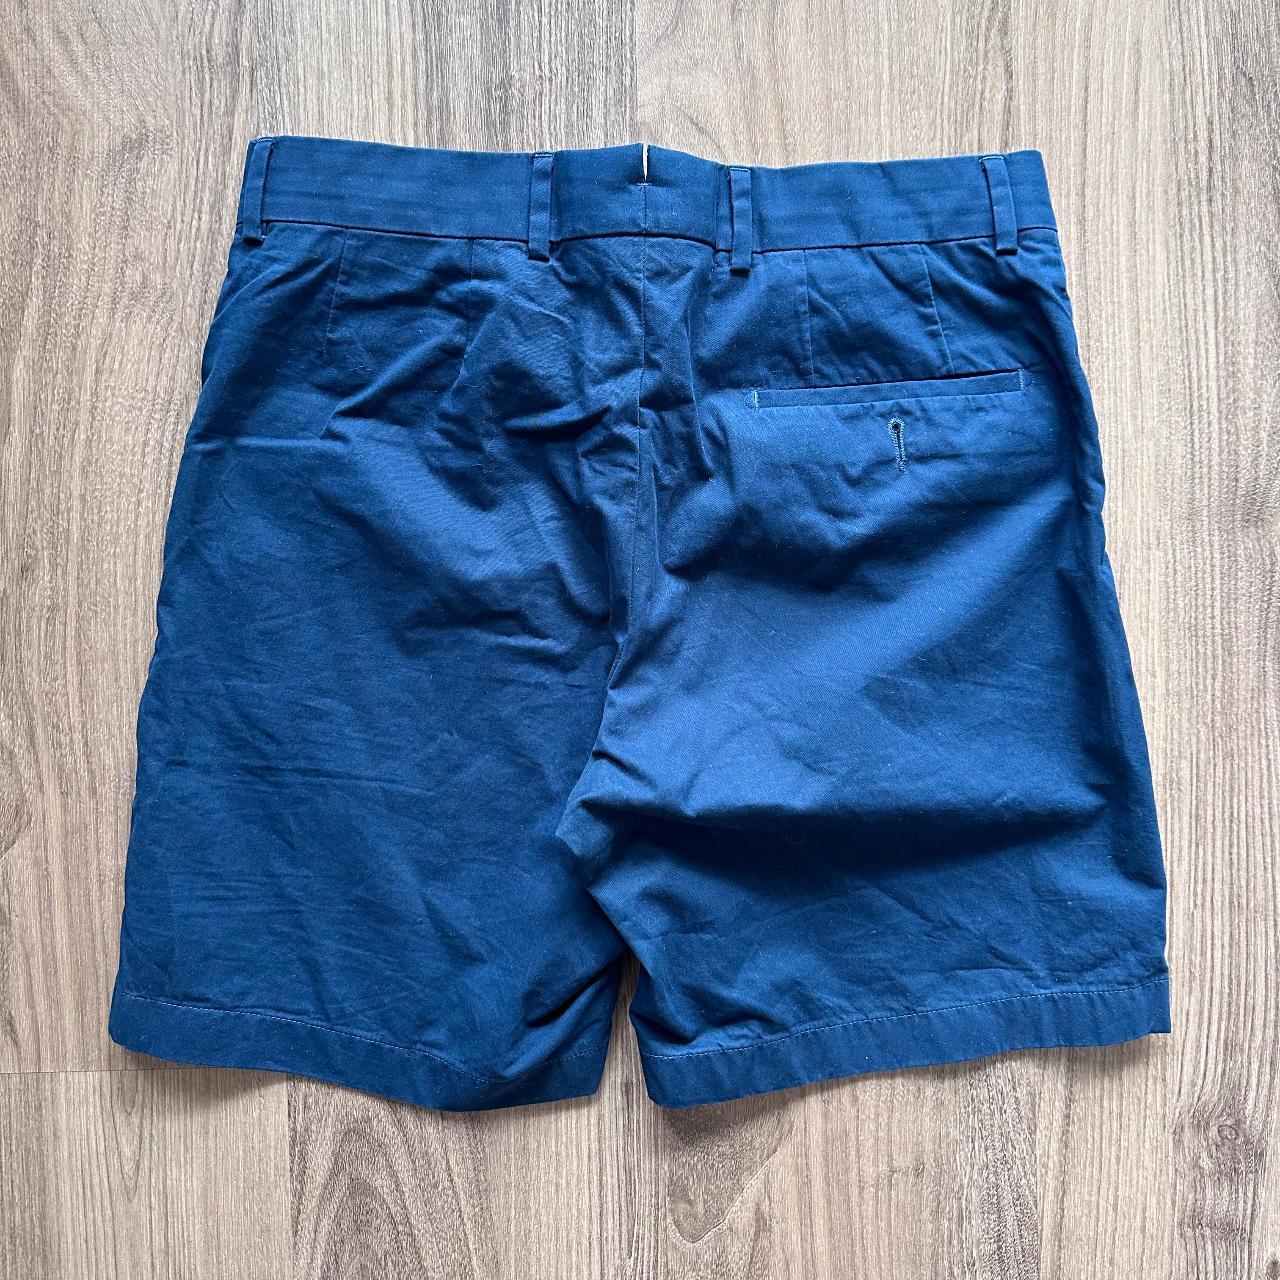 Orlebar Brown Men's Blue and Navy Shorts (2)